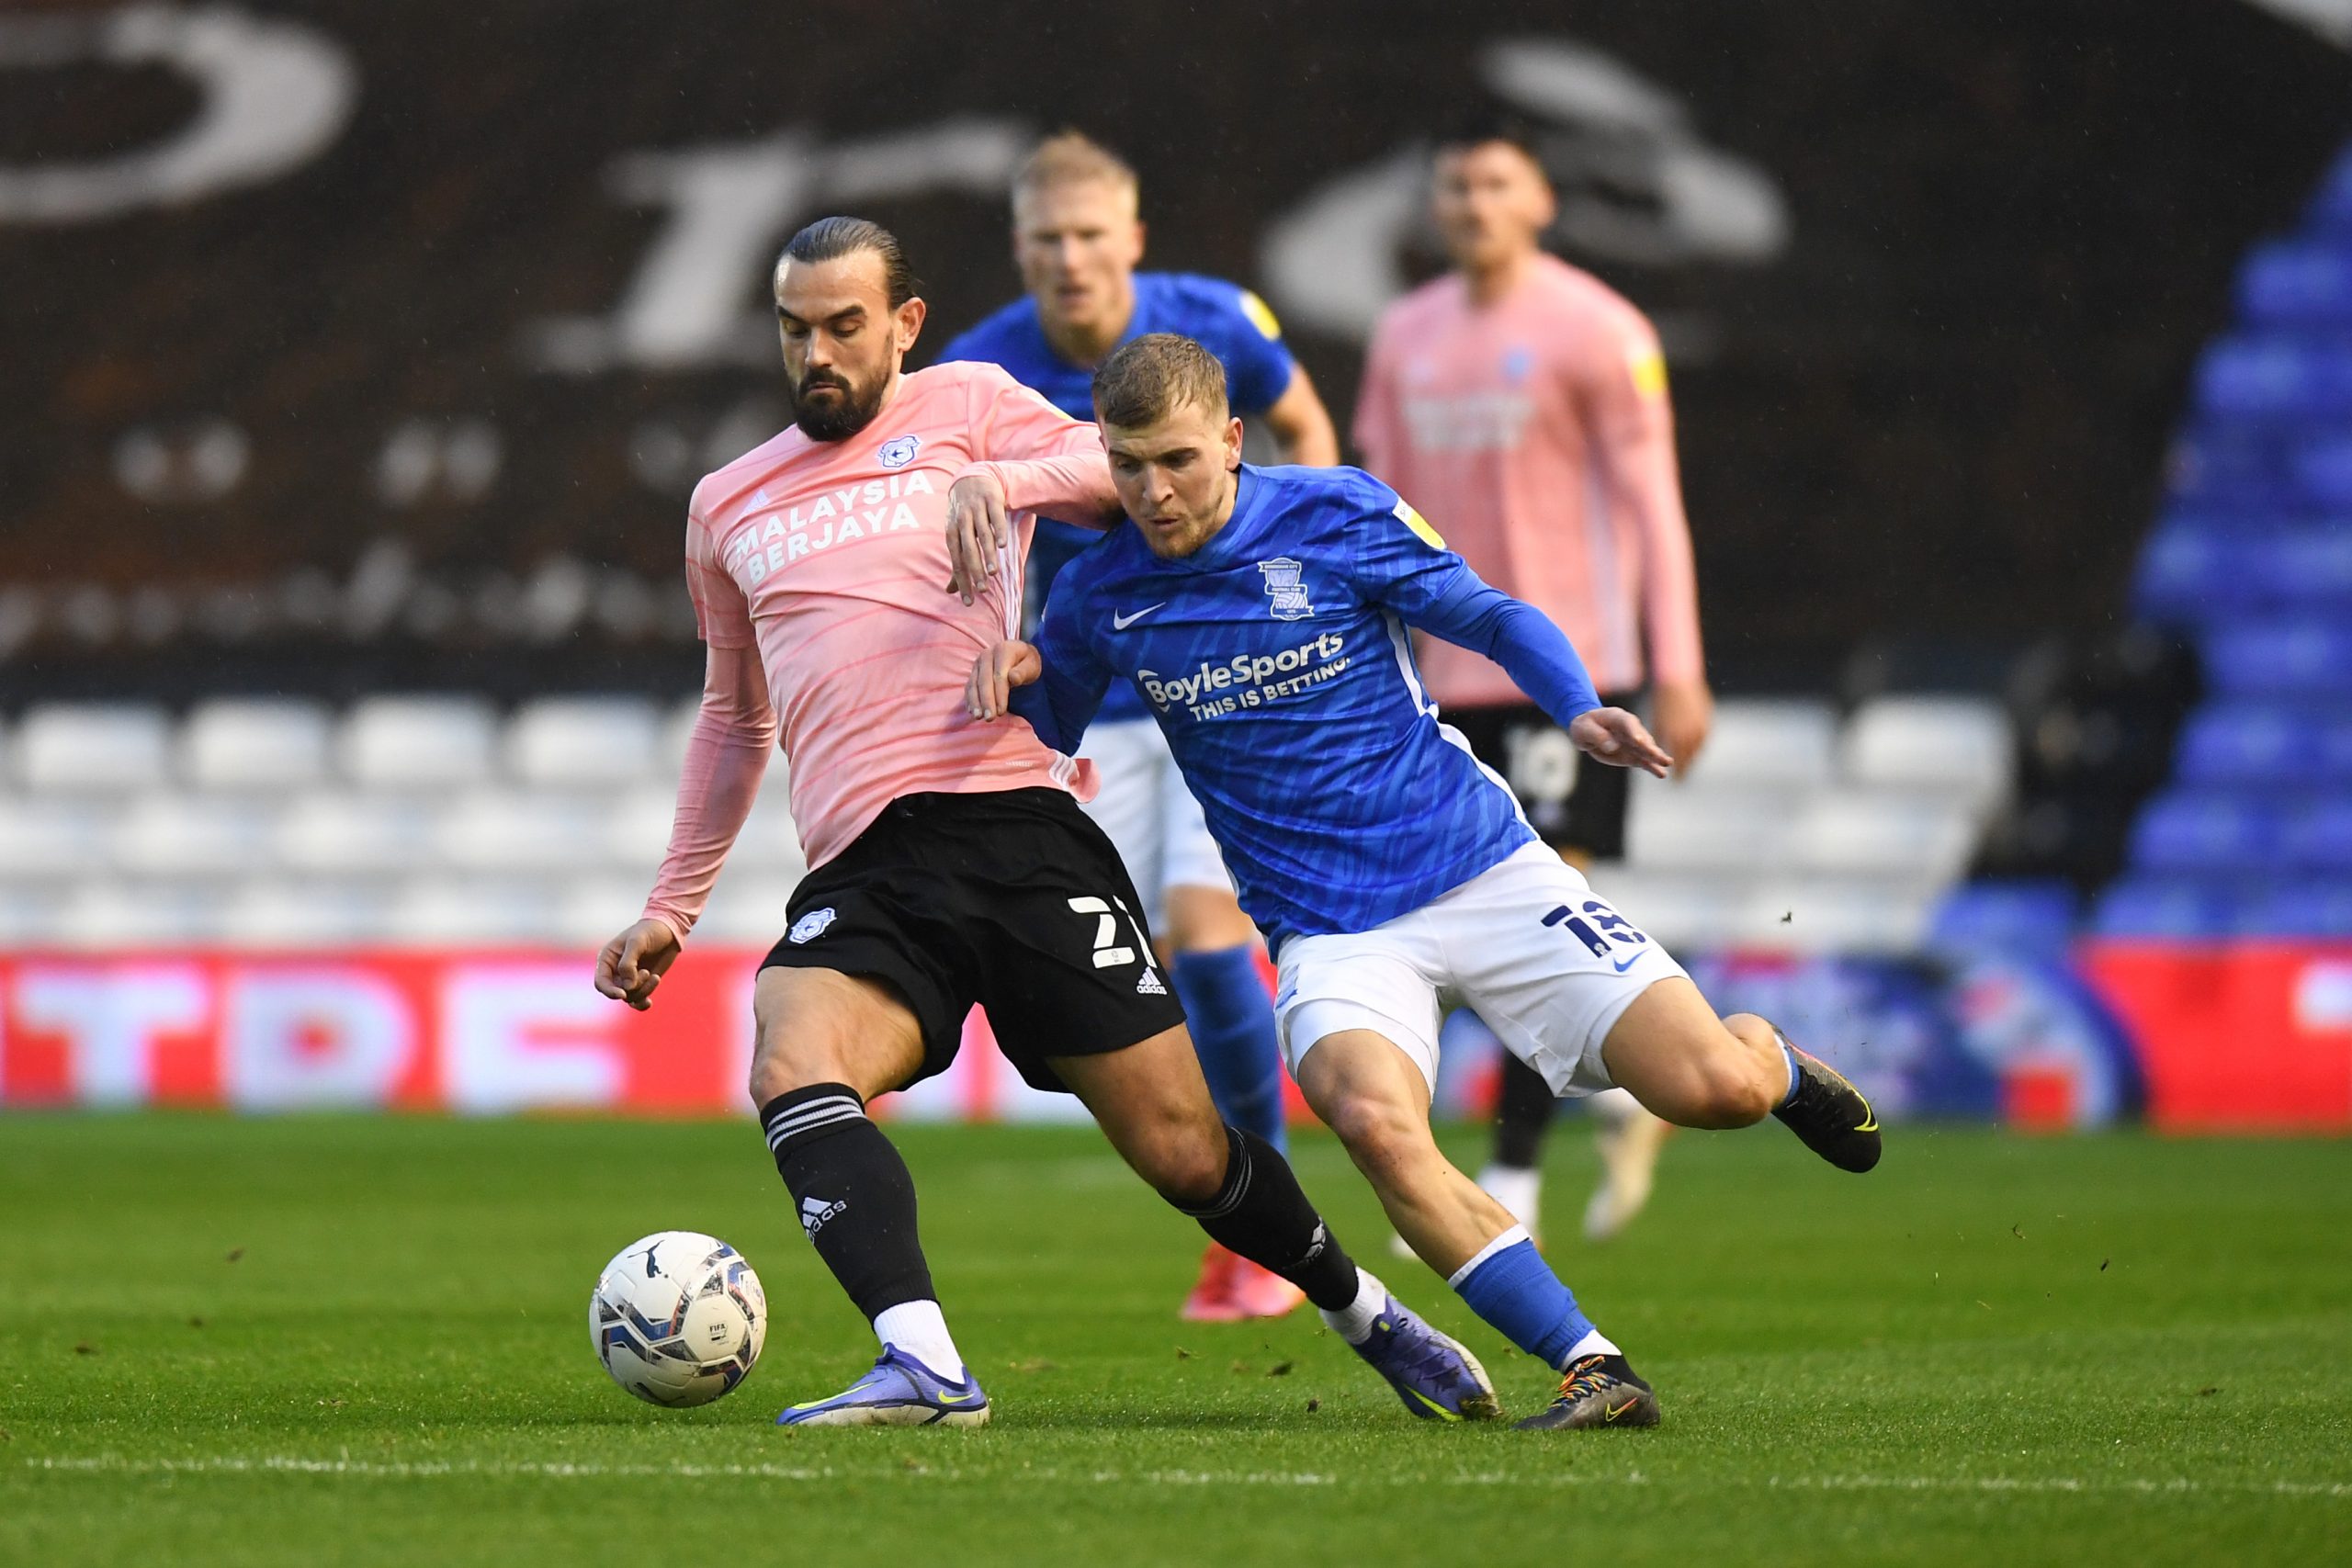 Celtic linked midfield star Riley McGree in action for Birmingham City